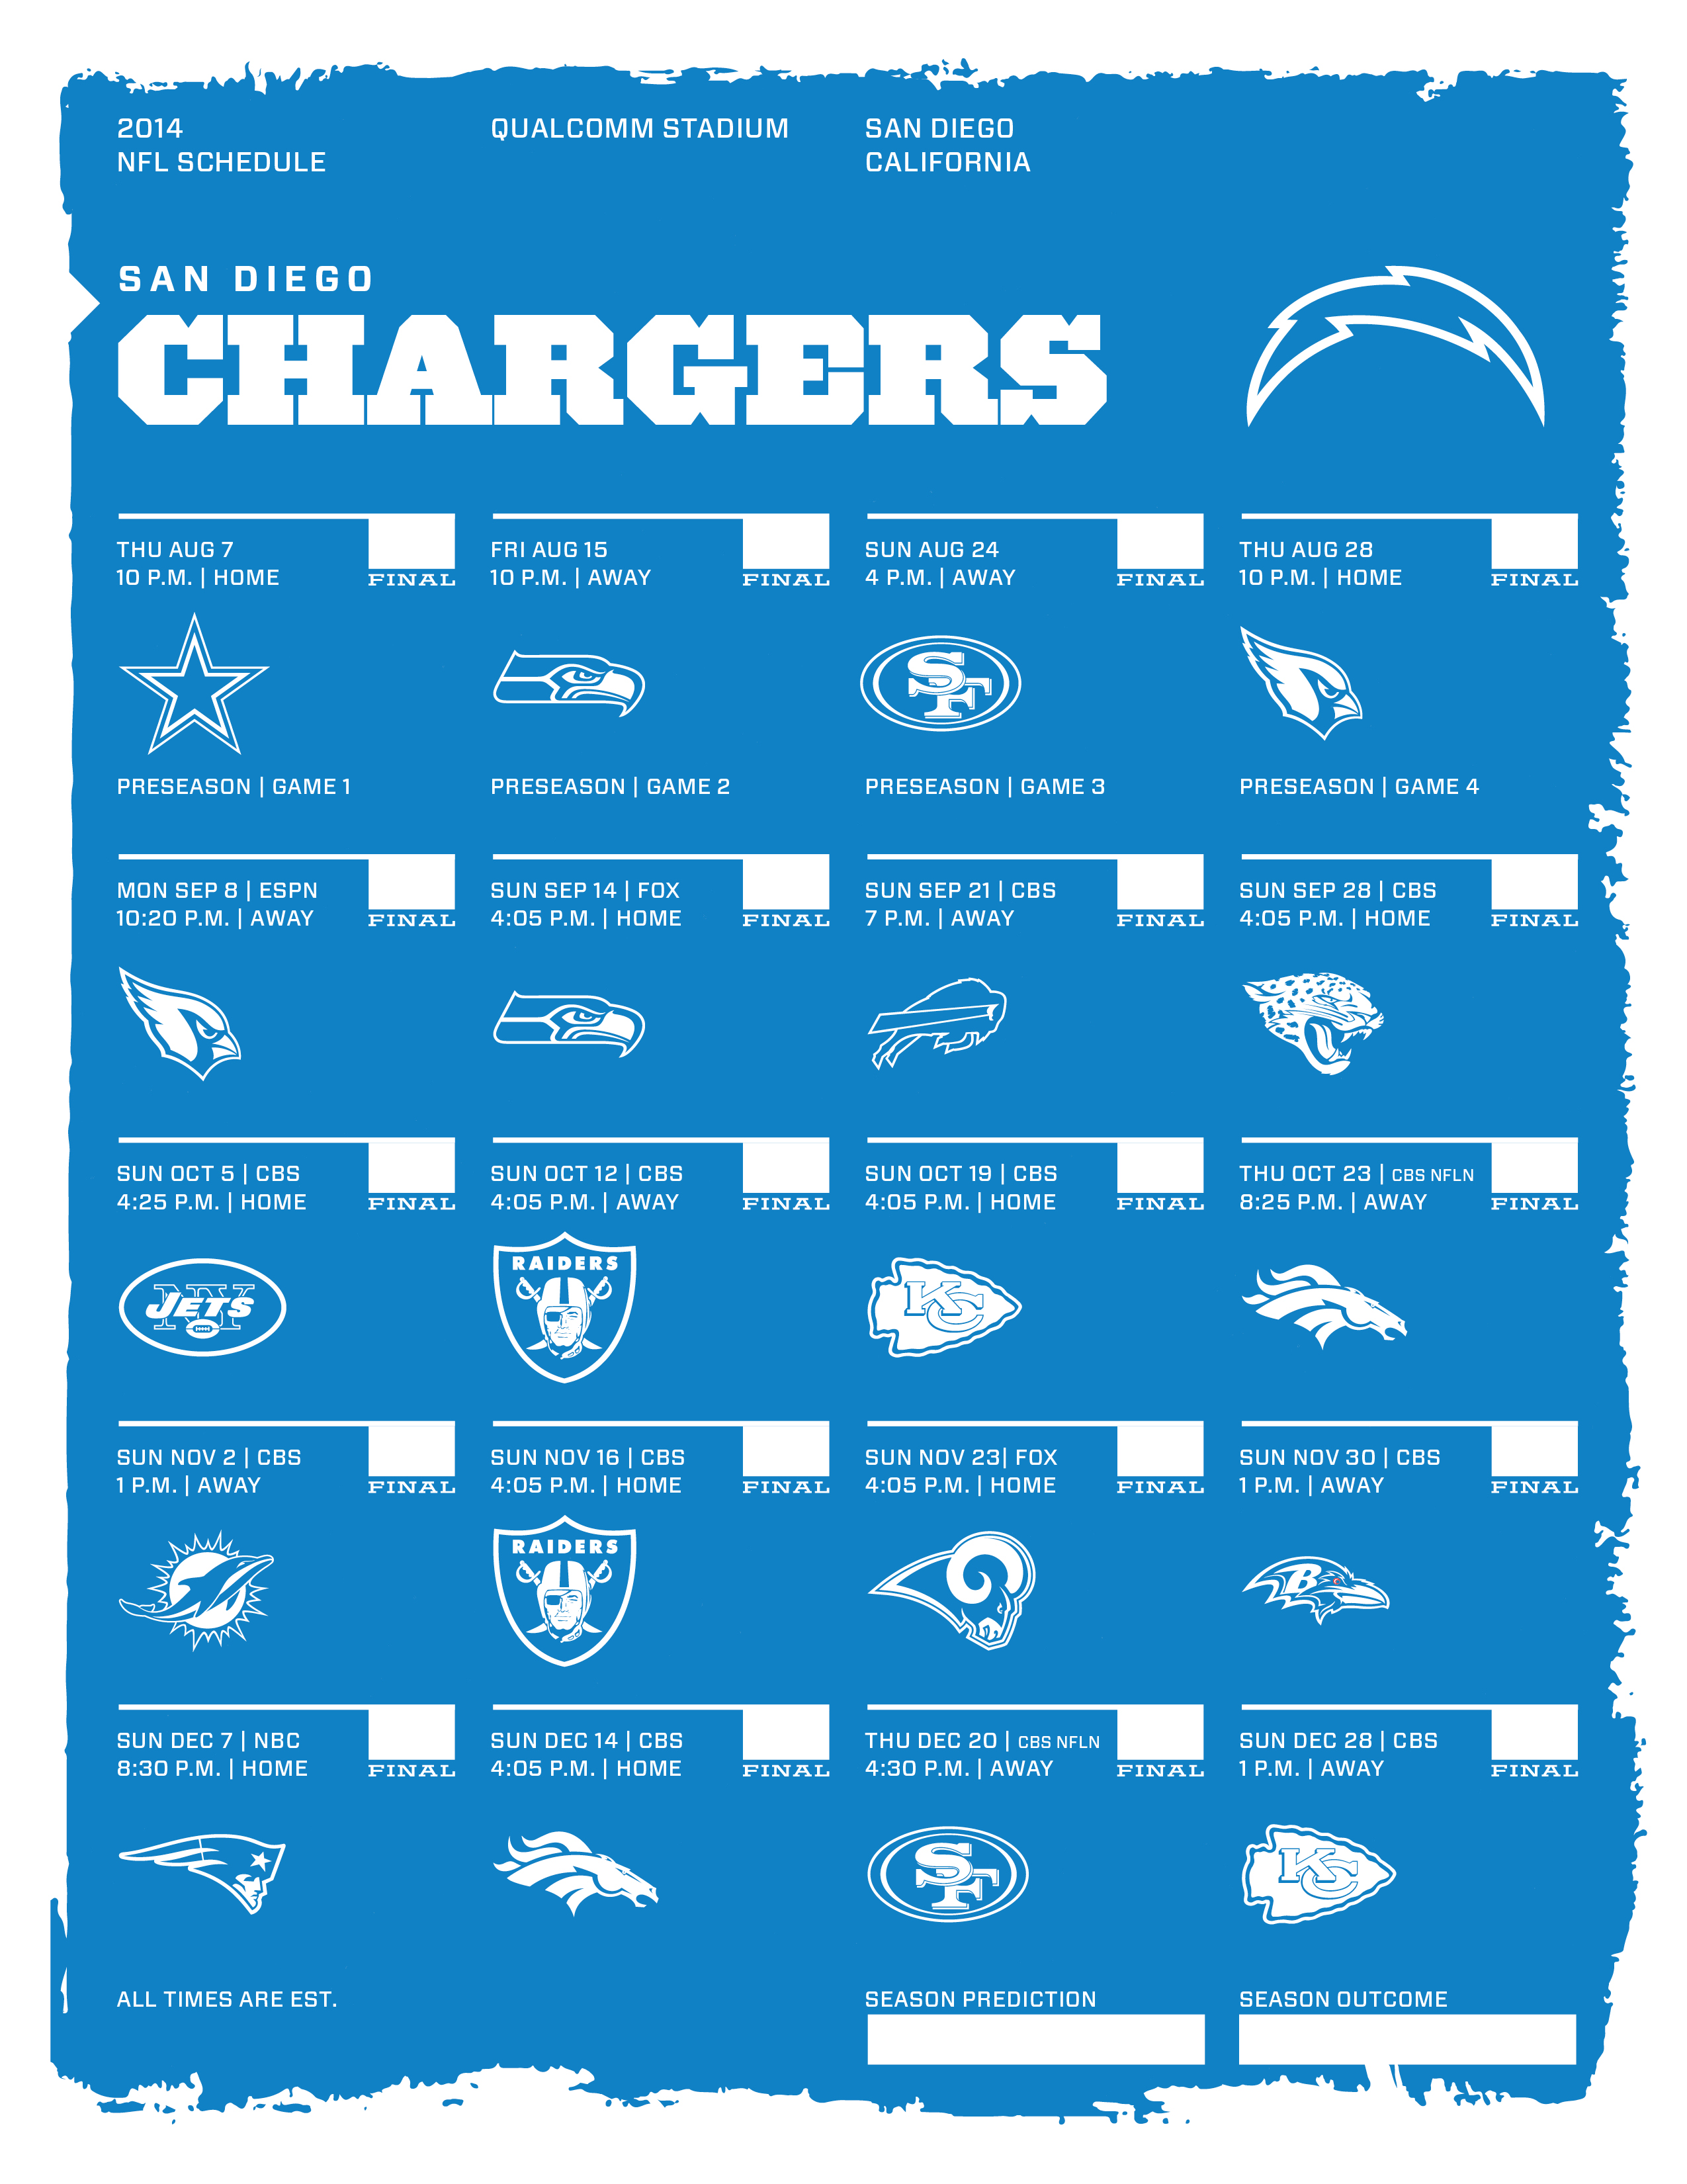 San Diego Chargers 2014 NFL Schedule My Teams Pinterest